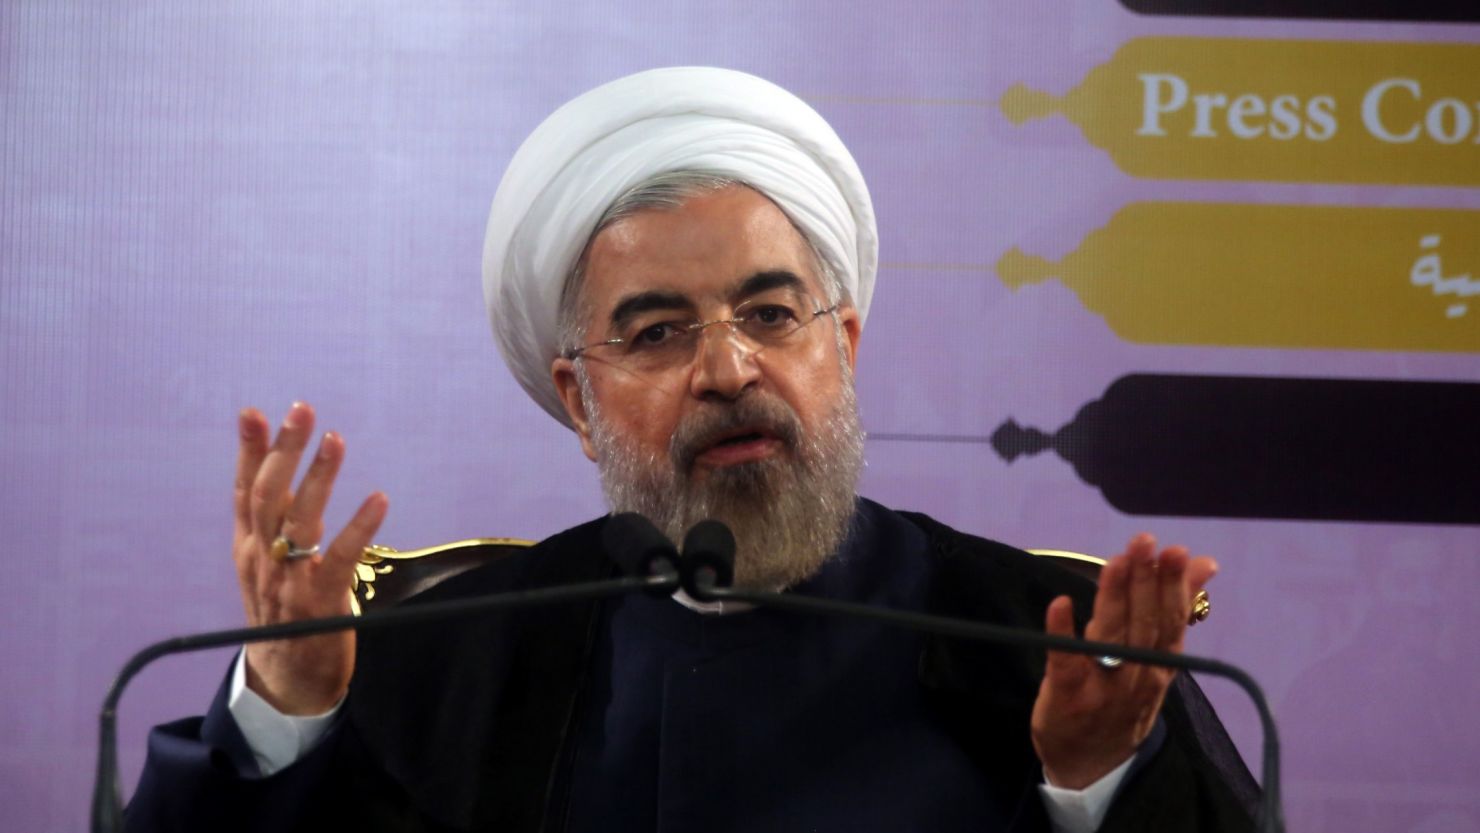 Iranian President Hassan Rouhani, shown in June, met with the UK Prime Minister at the United Nations.